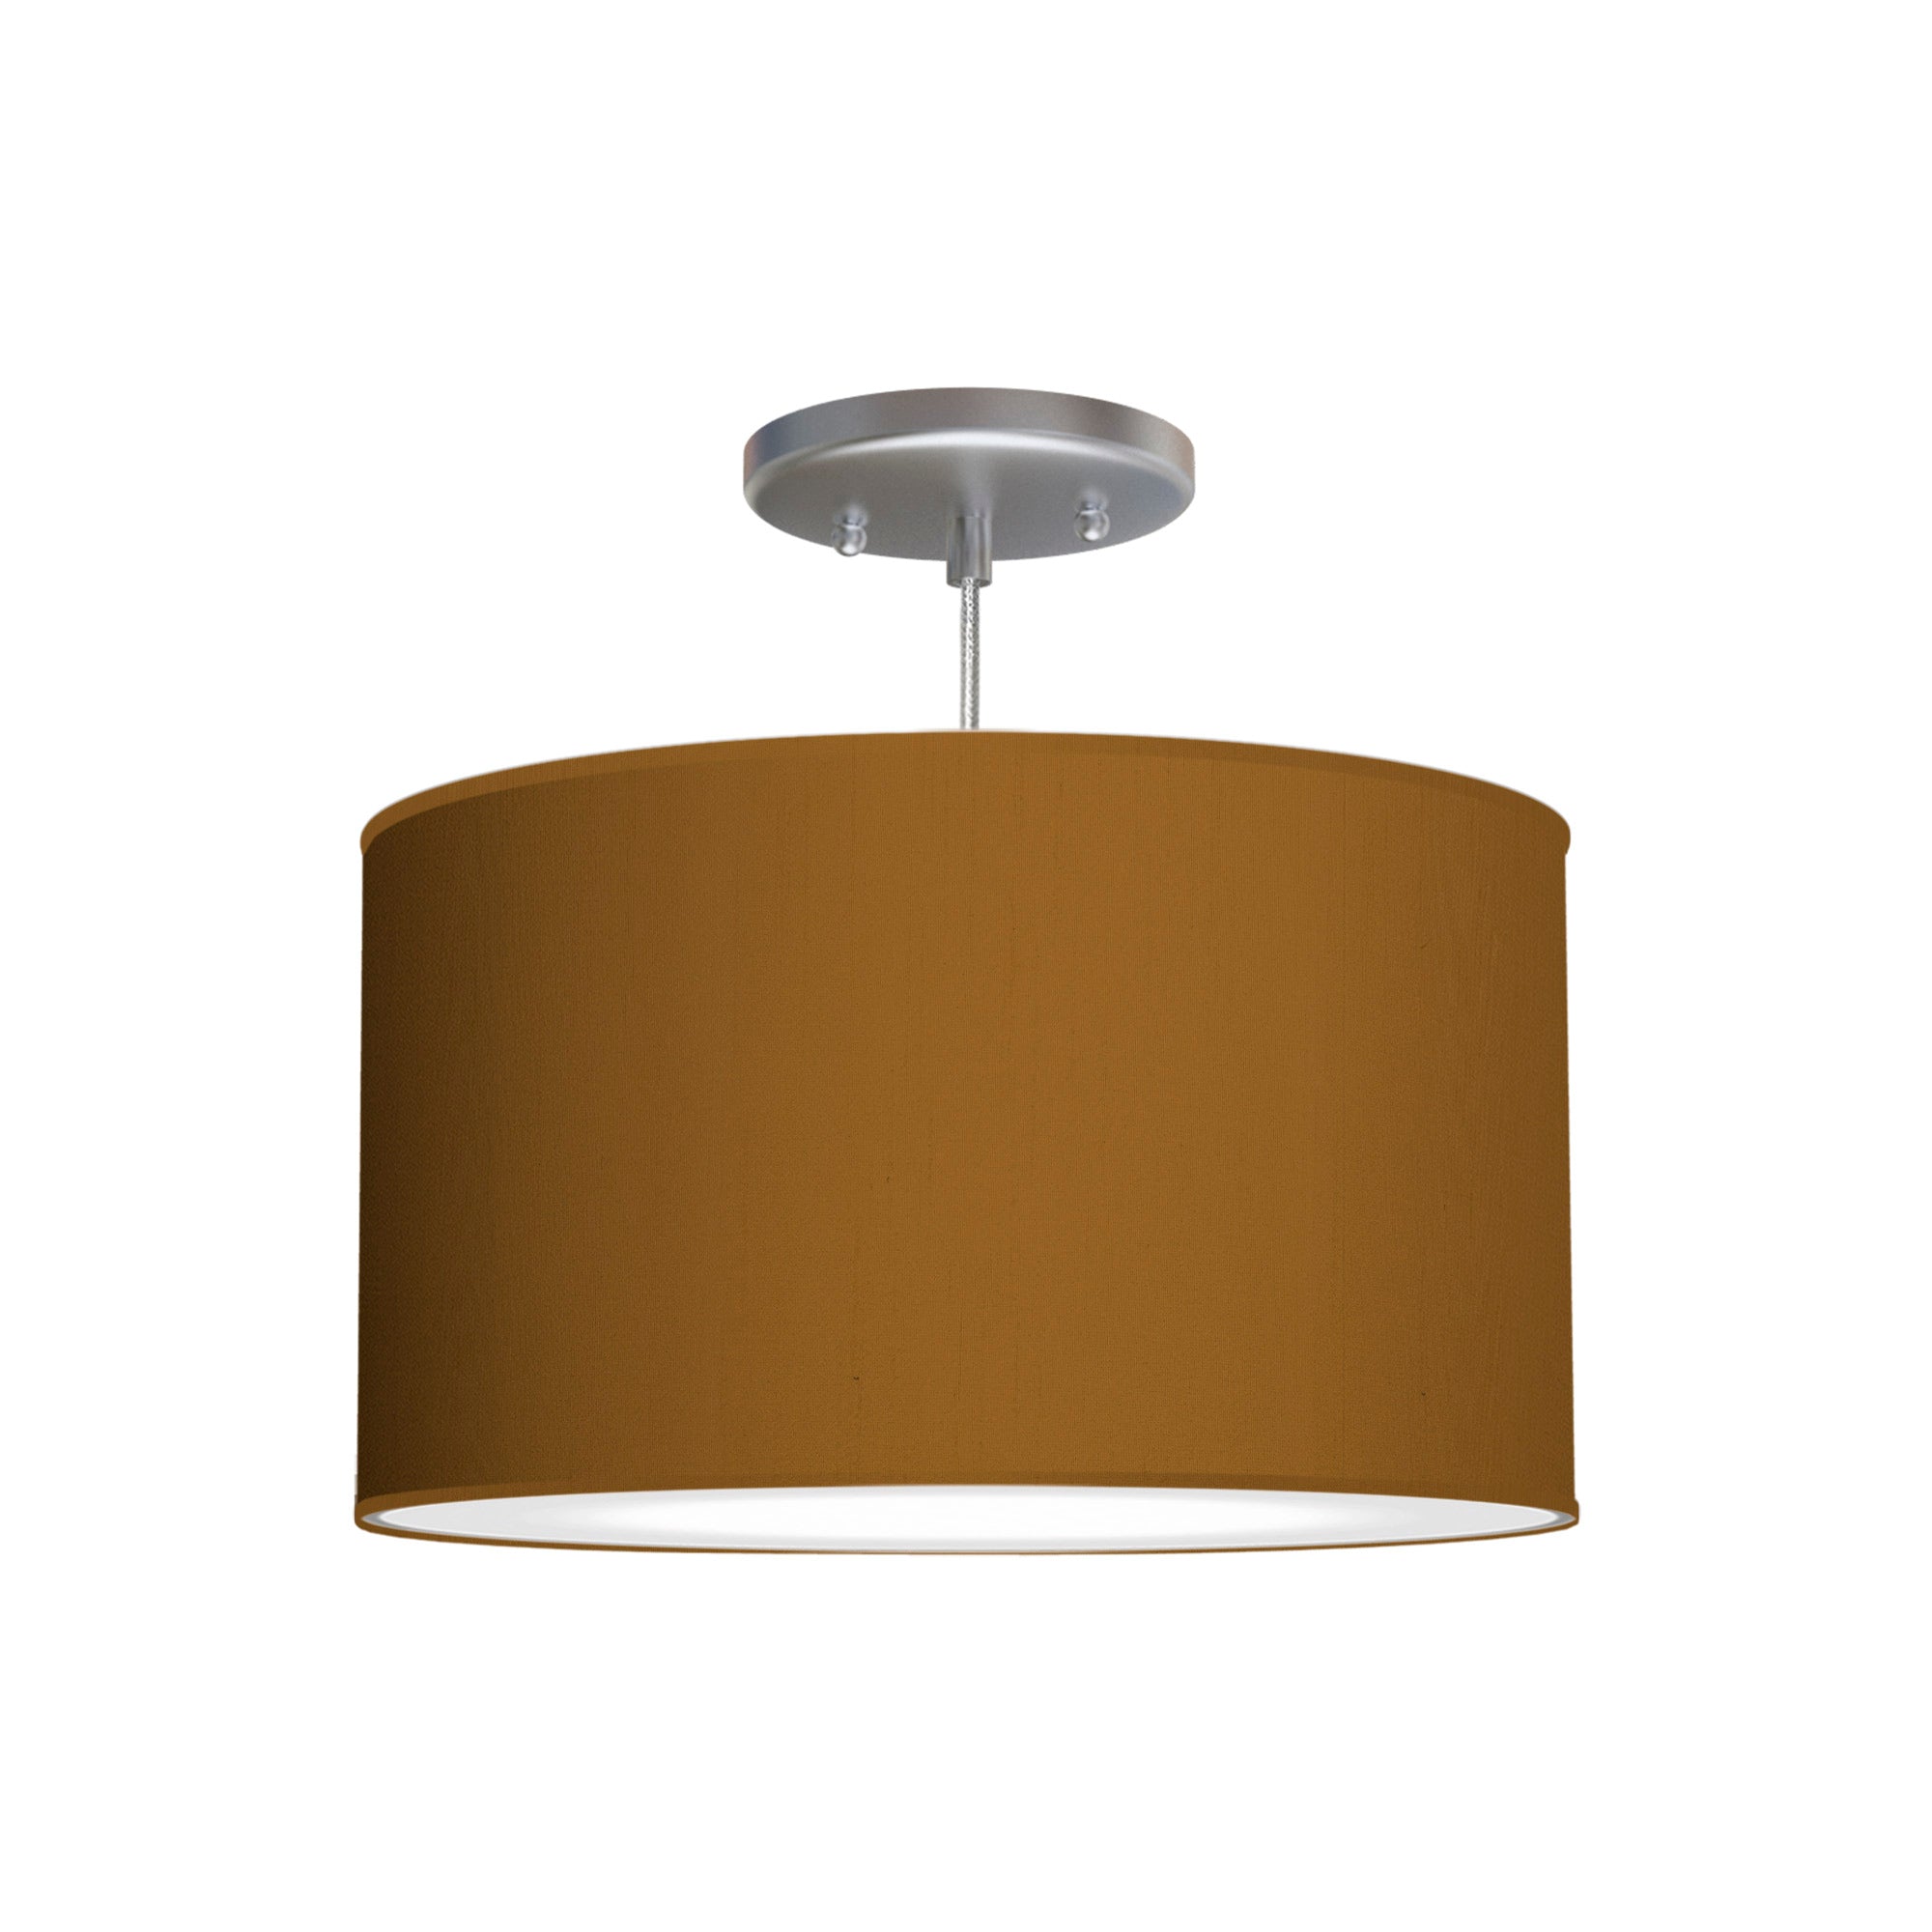 The Gab Hanging Lamp from Seascape Fixtures with a silk shade in antique copper color.